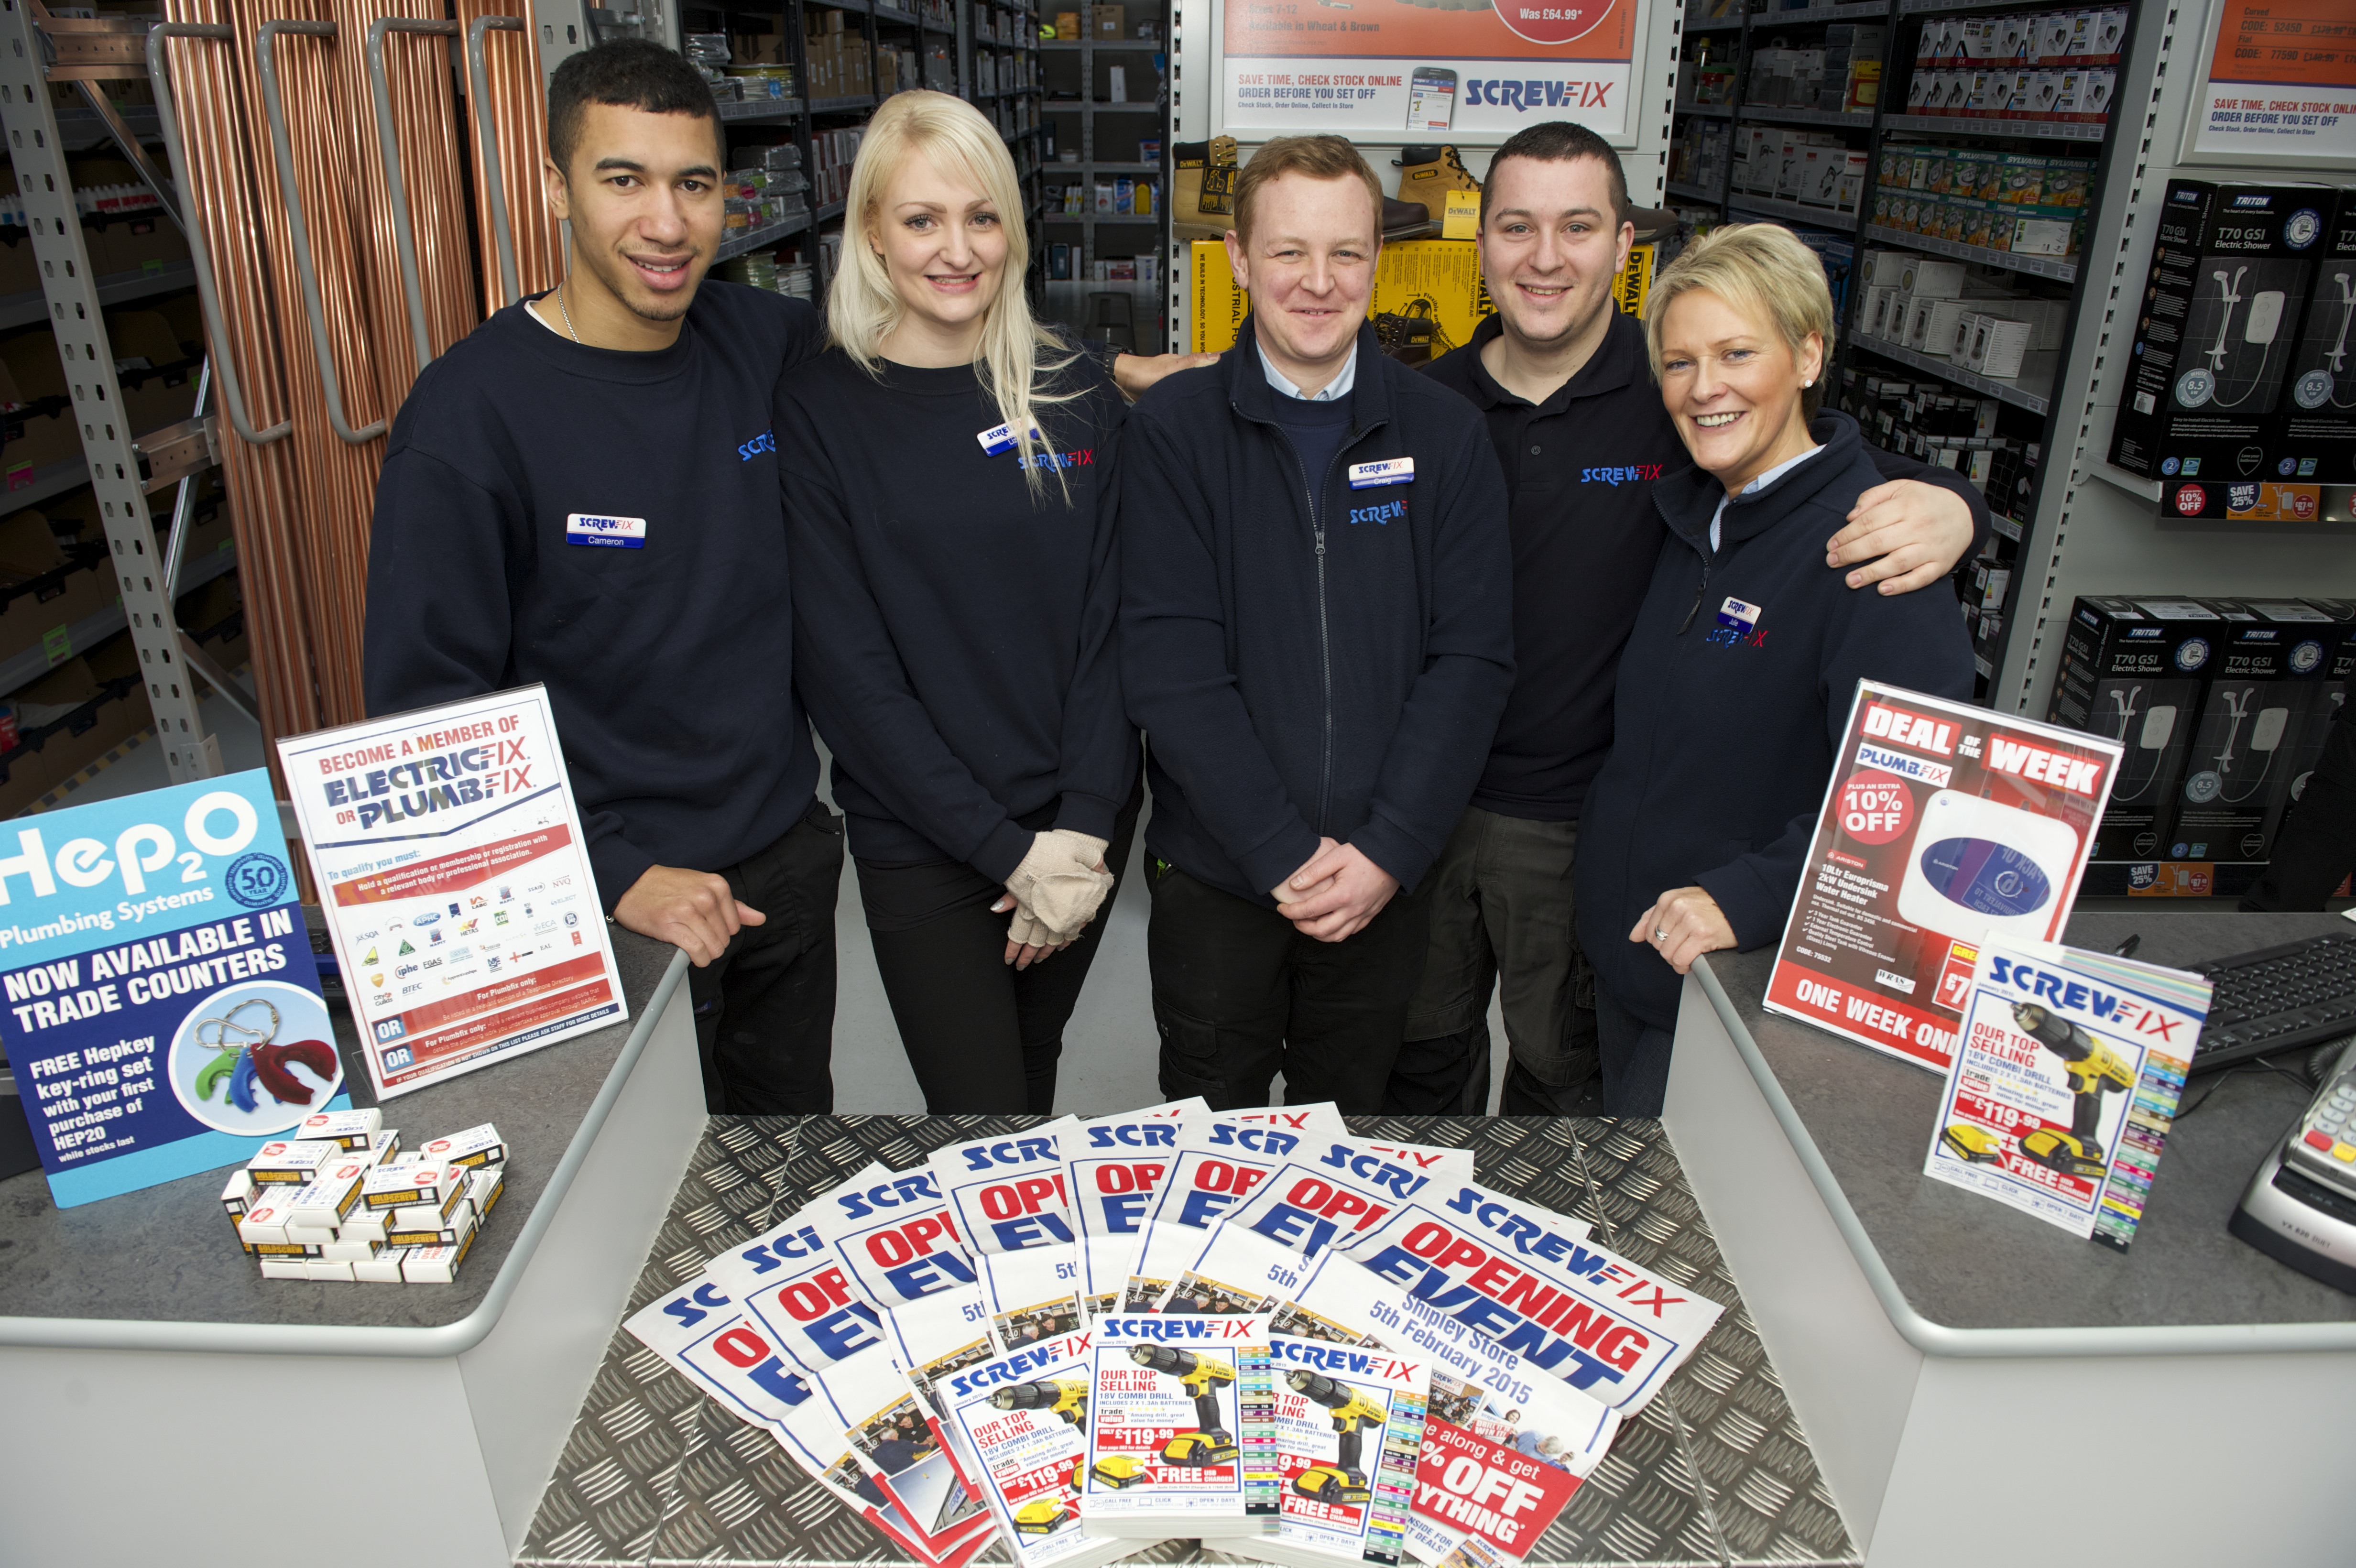 Shipley’s first Screwfix store is declared a runaway success